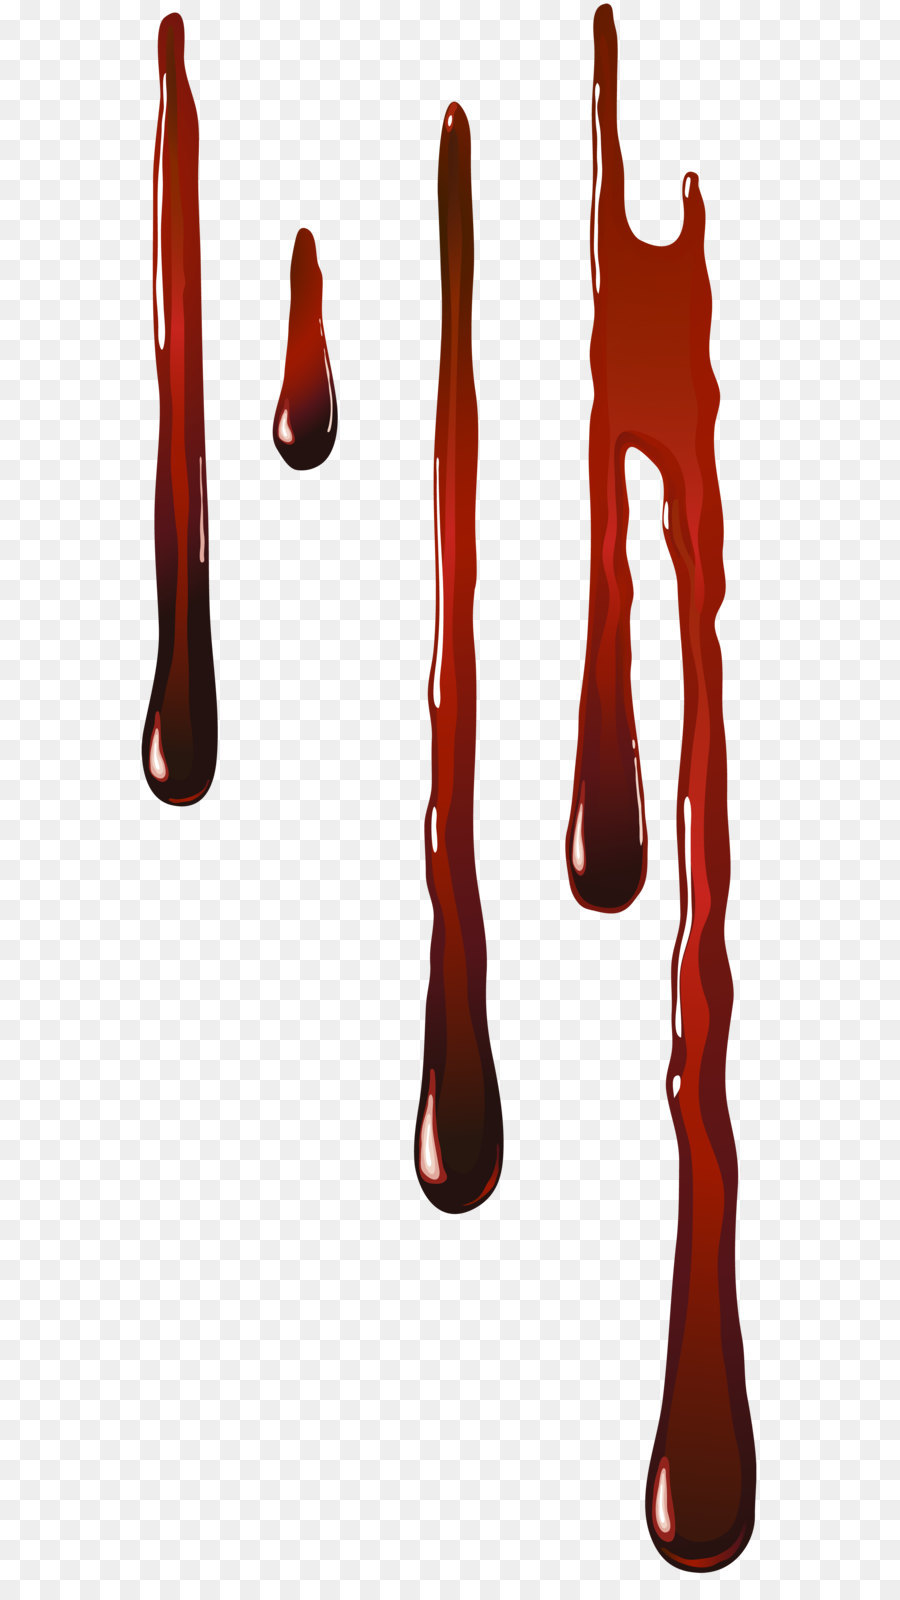 Free Blood Drip Transparent Background, Download Free Blood Drip Transparent Background png image, Free ClipArts on Clipart Library